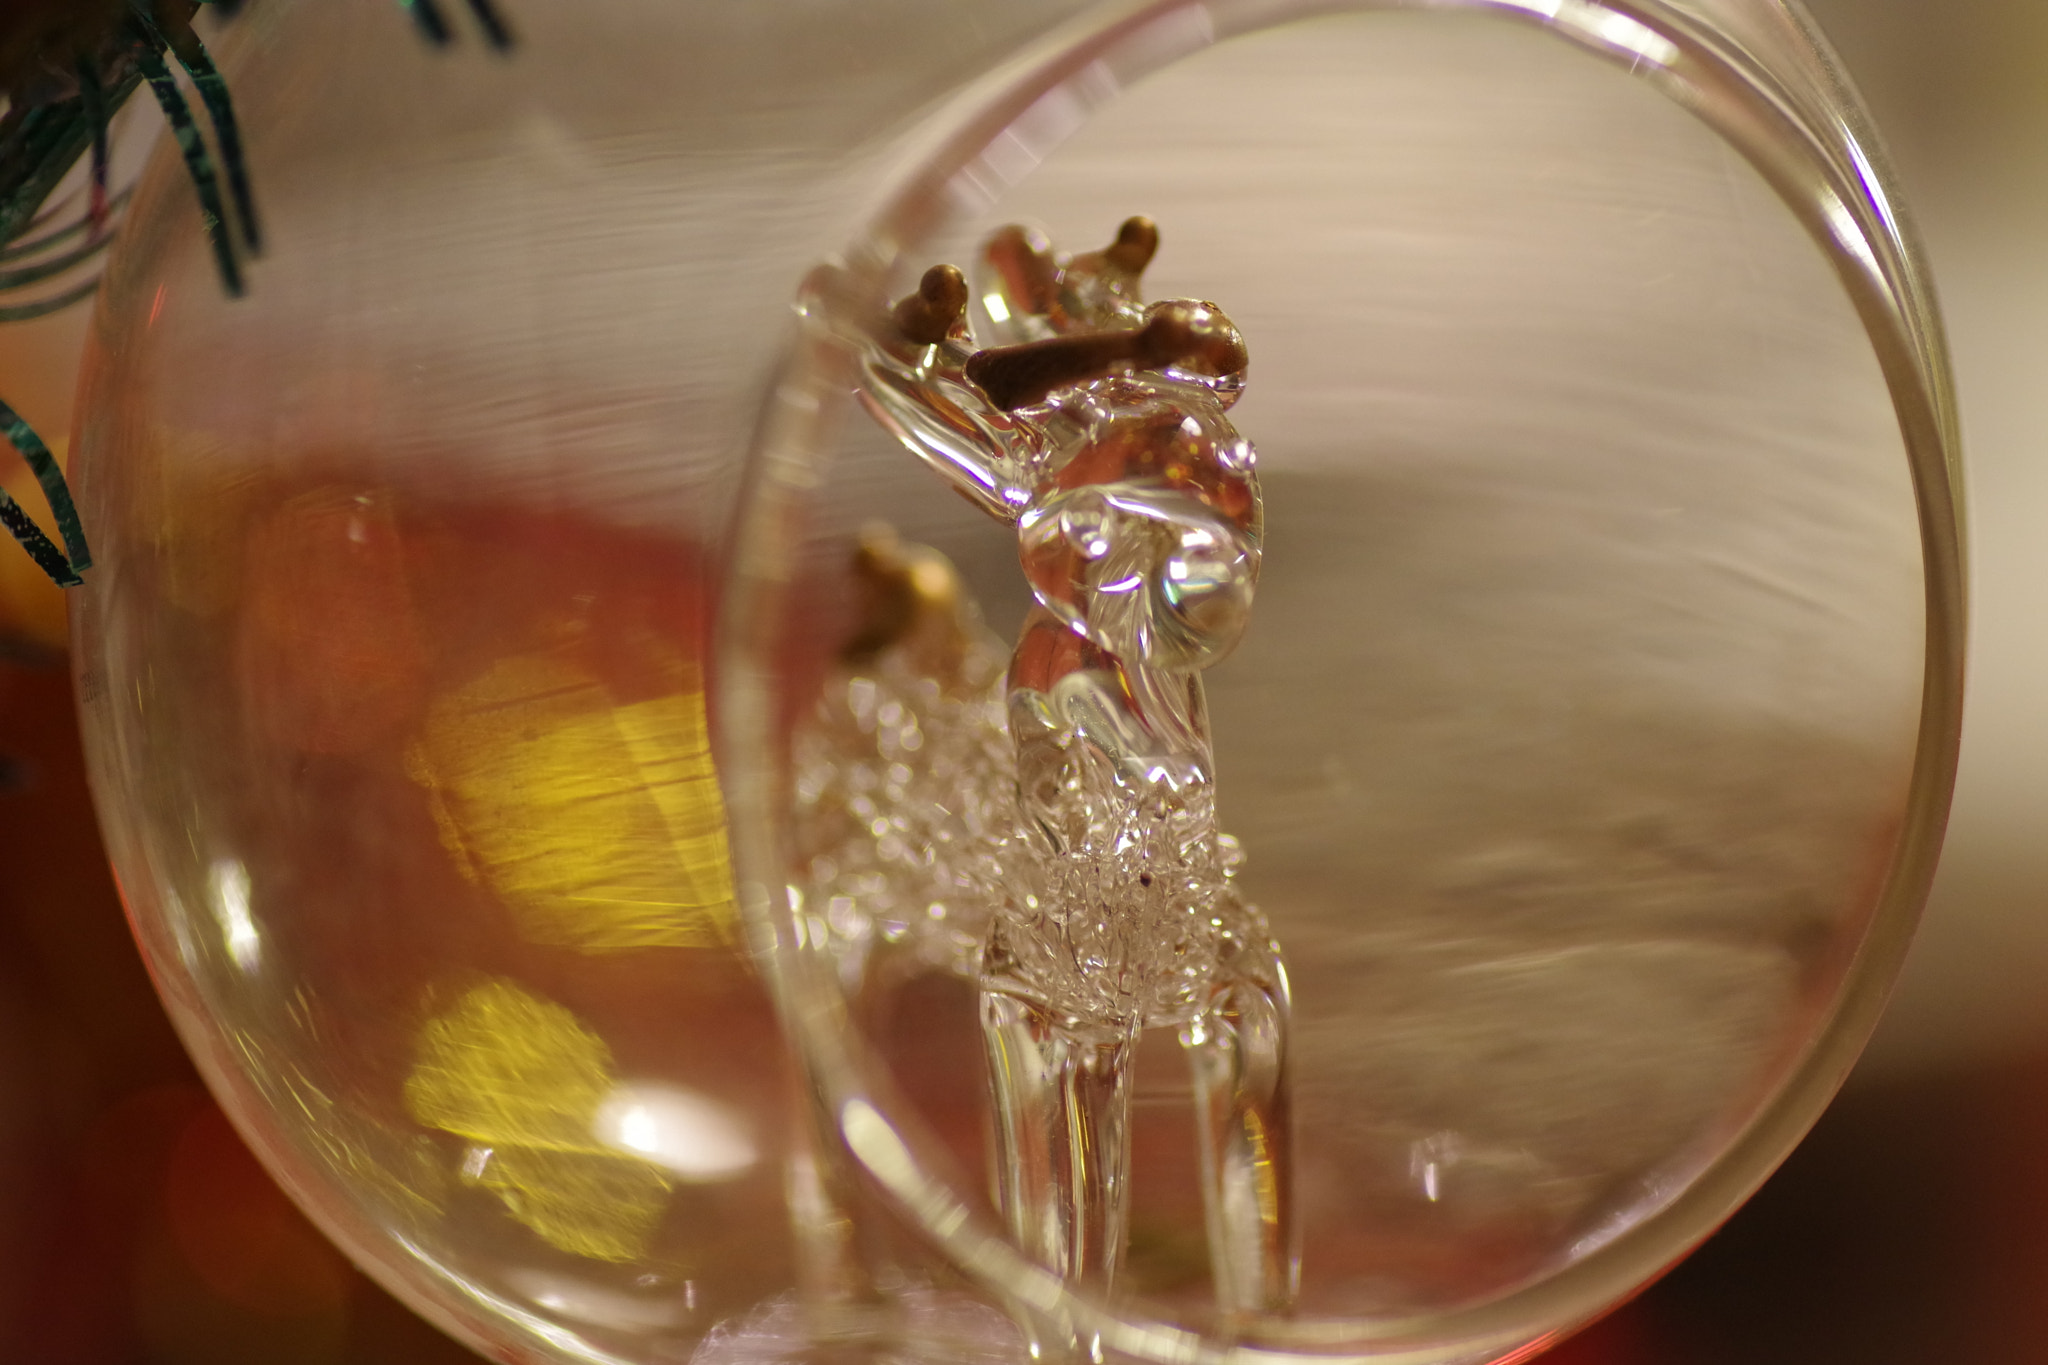 Pentax K-70 sample photo. In the bauble photography